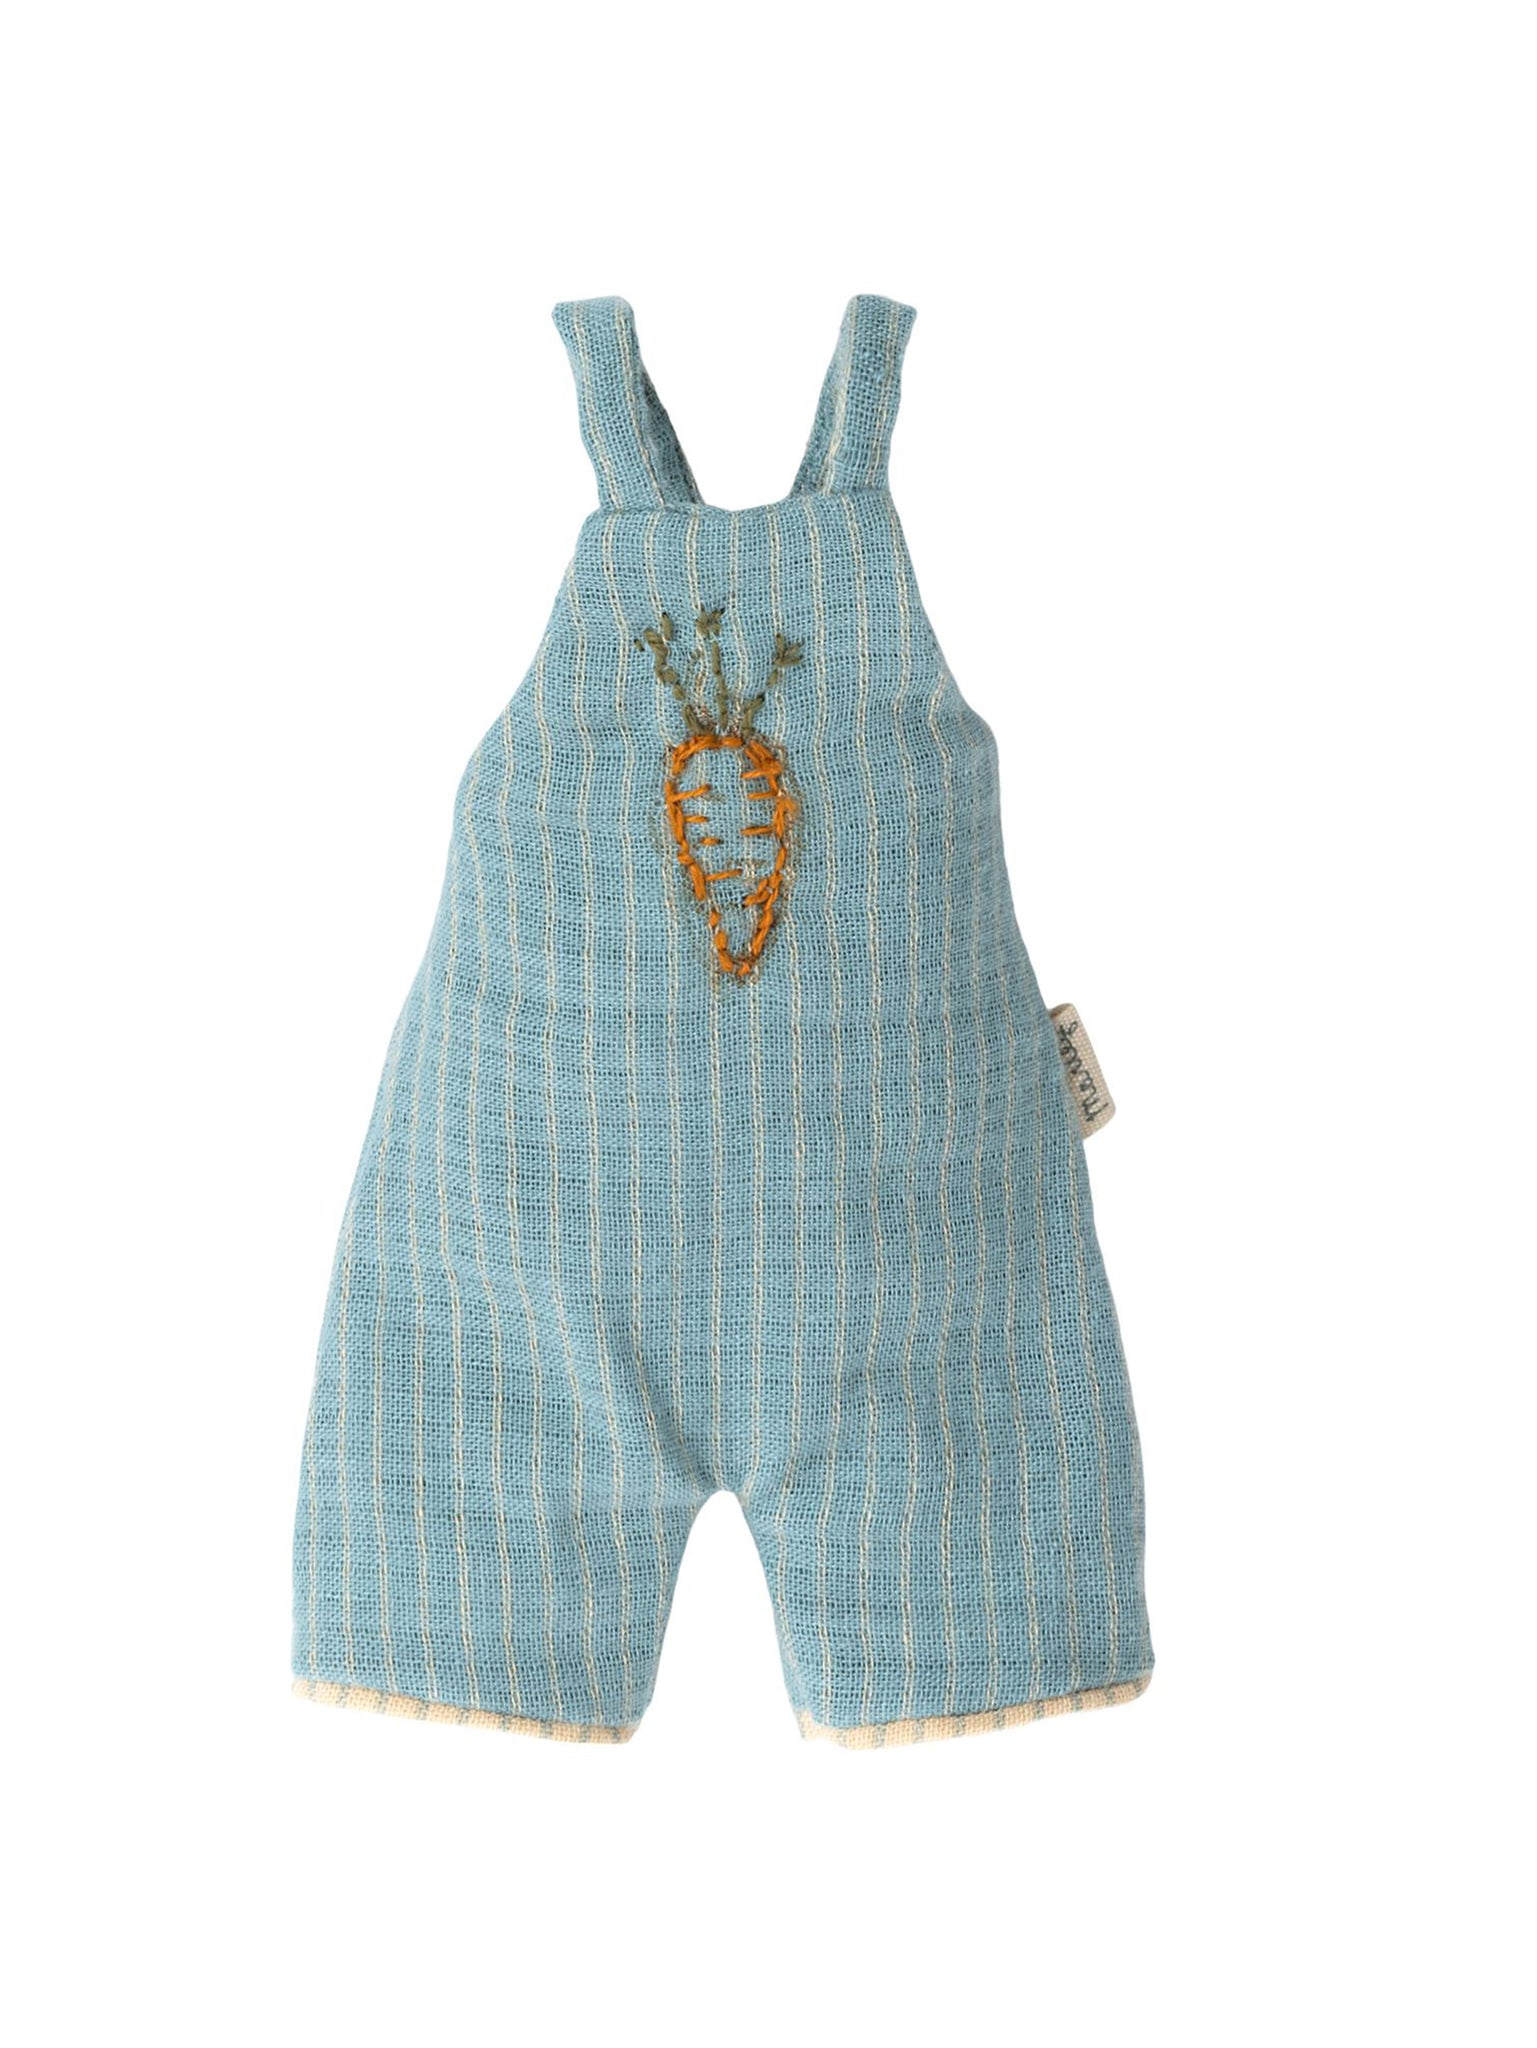 Maileg Rabbit and Bunny Clothes Size 2 Overalls Weston Table